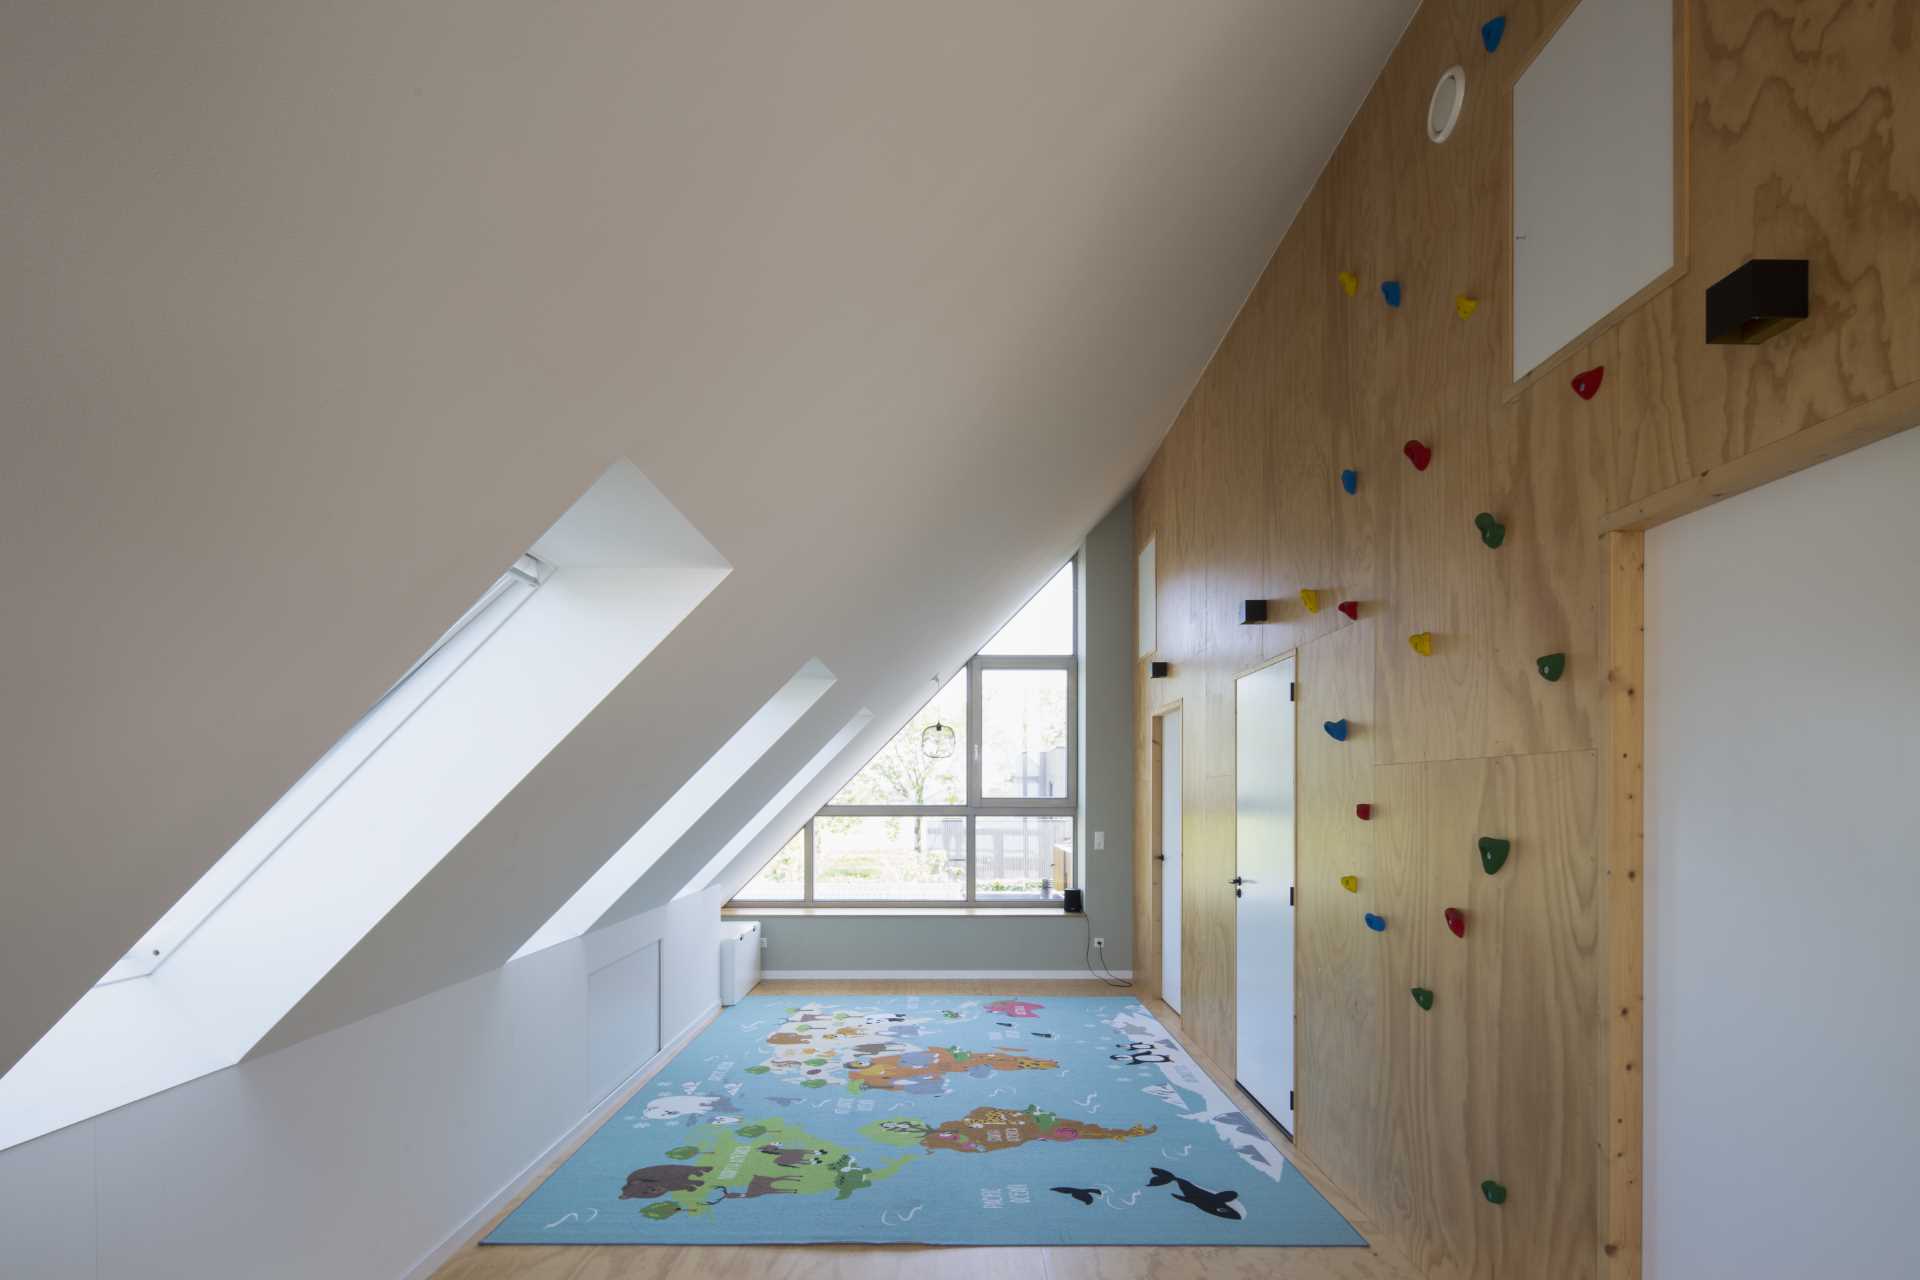 The playroom, with its sloped ceiling, has a plywood wall adorned with rock climbing supports, while a colorful rug covers the floor. The white doors in the plywood wall lead to bedrooms and a bathroom.